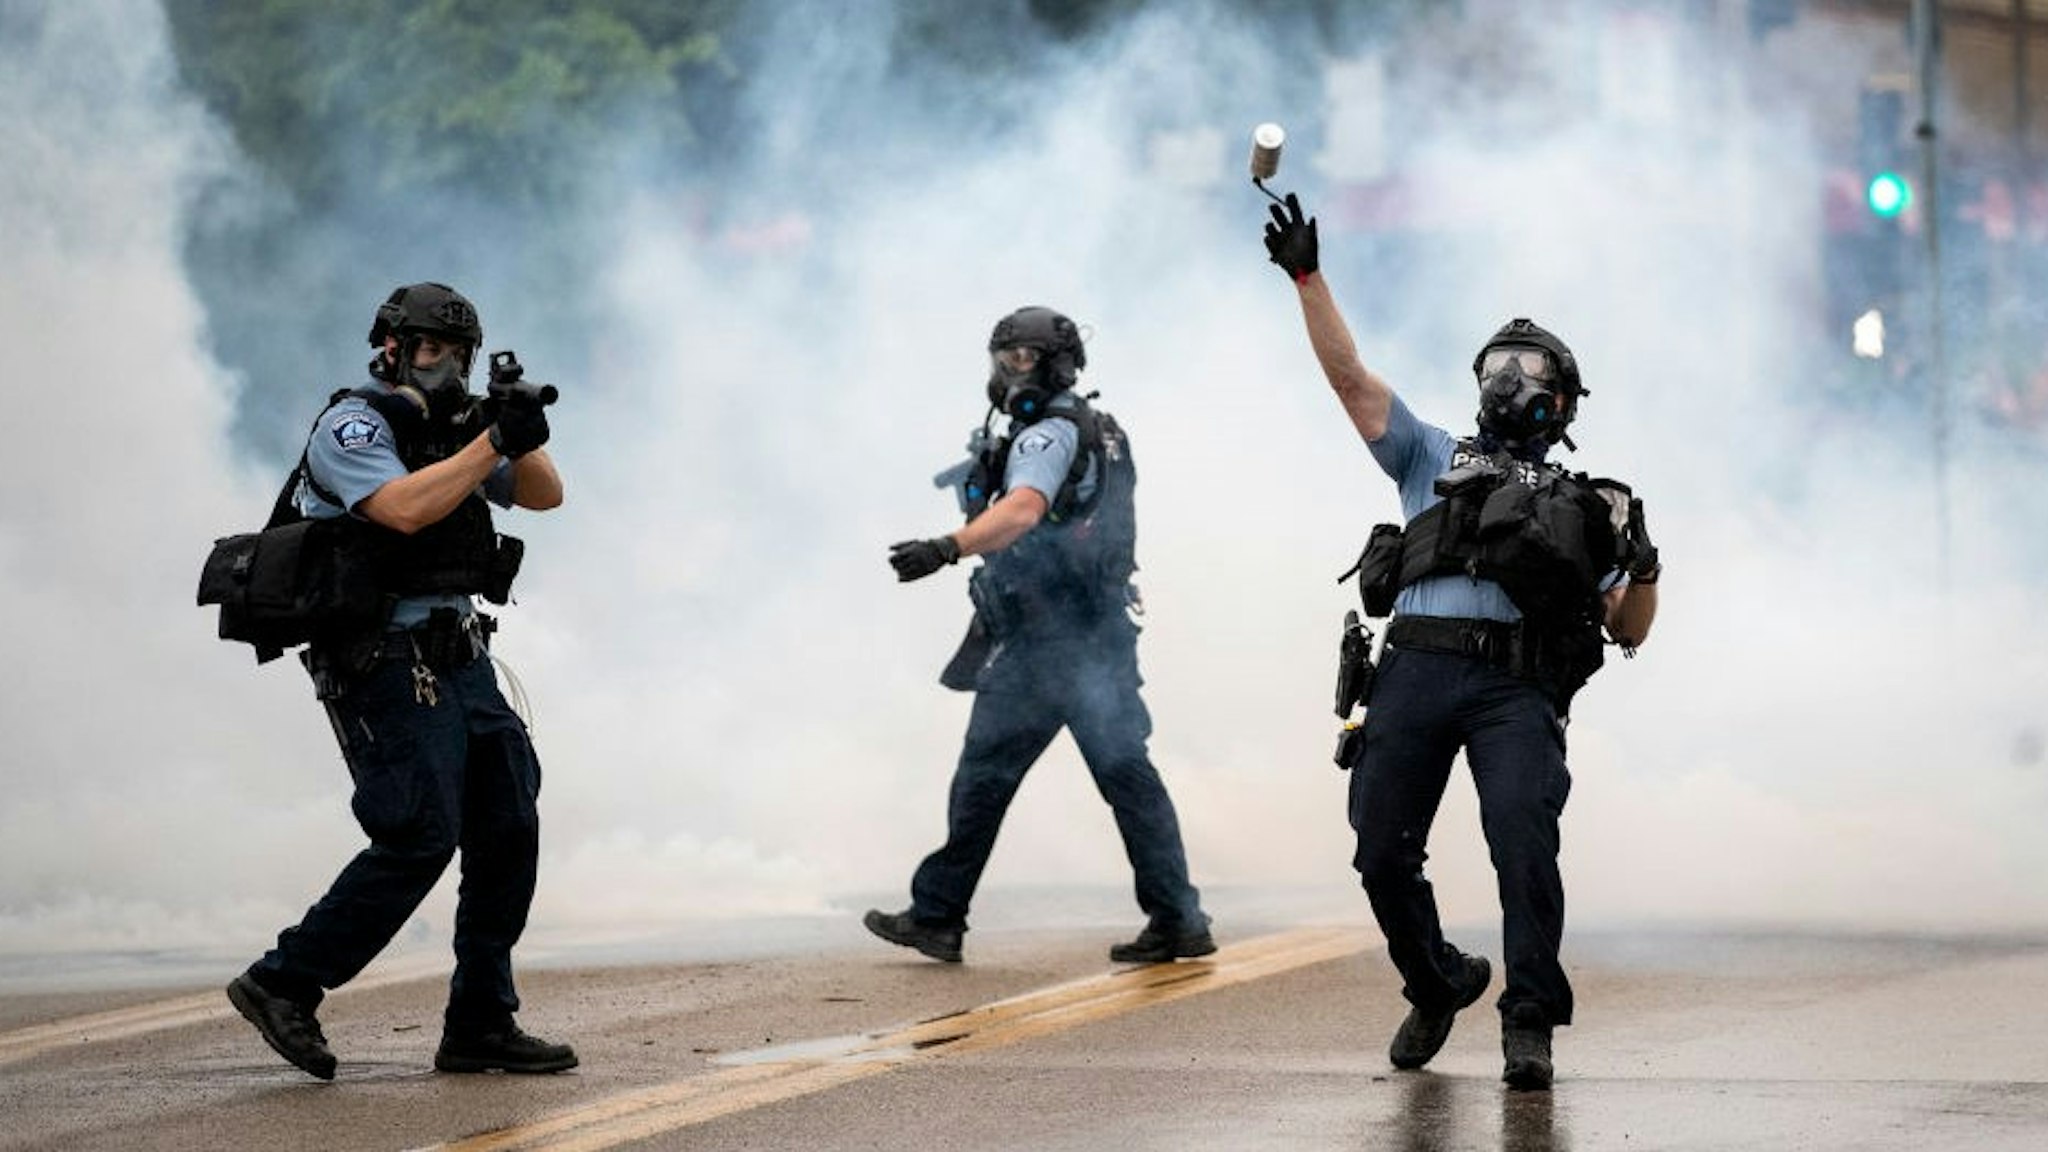 MINNEAPOLIS, MN,- MAY 26: Police clashed with protesters at the Minneapolis 3rd Police Precinct. People gathered at Chicago Ave. and East 38th Street during a rally in Minneapolis on Tuesday, May 26, 2020. Federal authorities are investigating a white Minneapolis police officer for possible civil rights violations, after a video surface showing him kneeling on a handcuffed African-American man’s neck and ignoring the man’s protests that he couldn’t breathe. The man later died. An attorney for the man’s family identified him as George Floyd. (Photo by